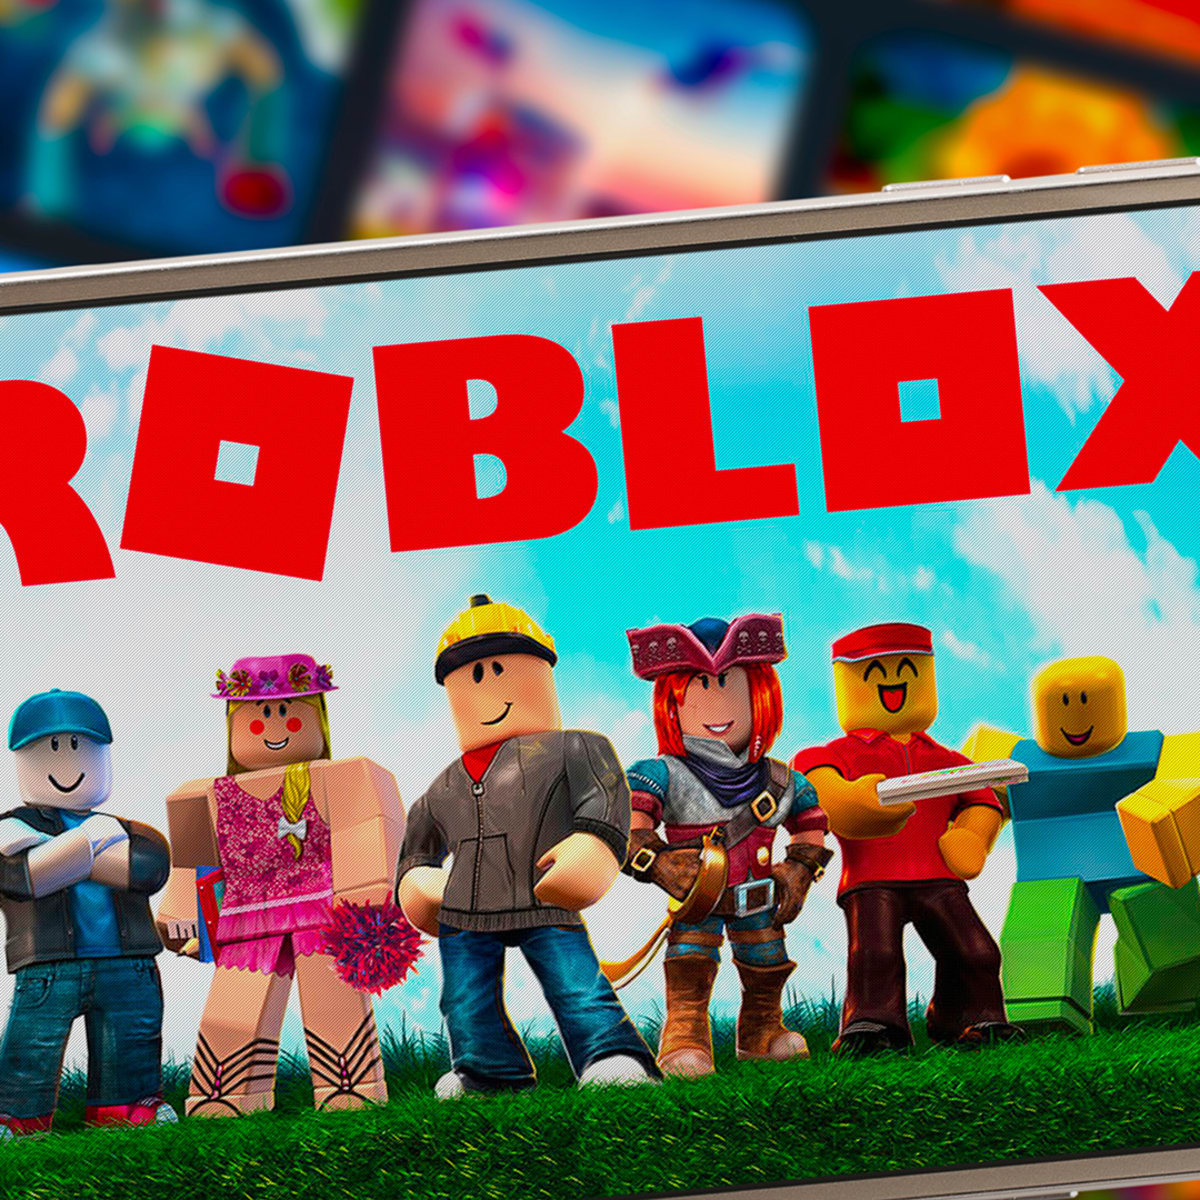 Roblox To Go Public With Direct Listing Of 199 Million Shares Thestreet - roblox ticker symbol